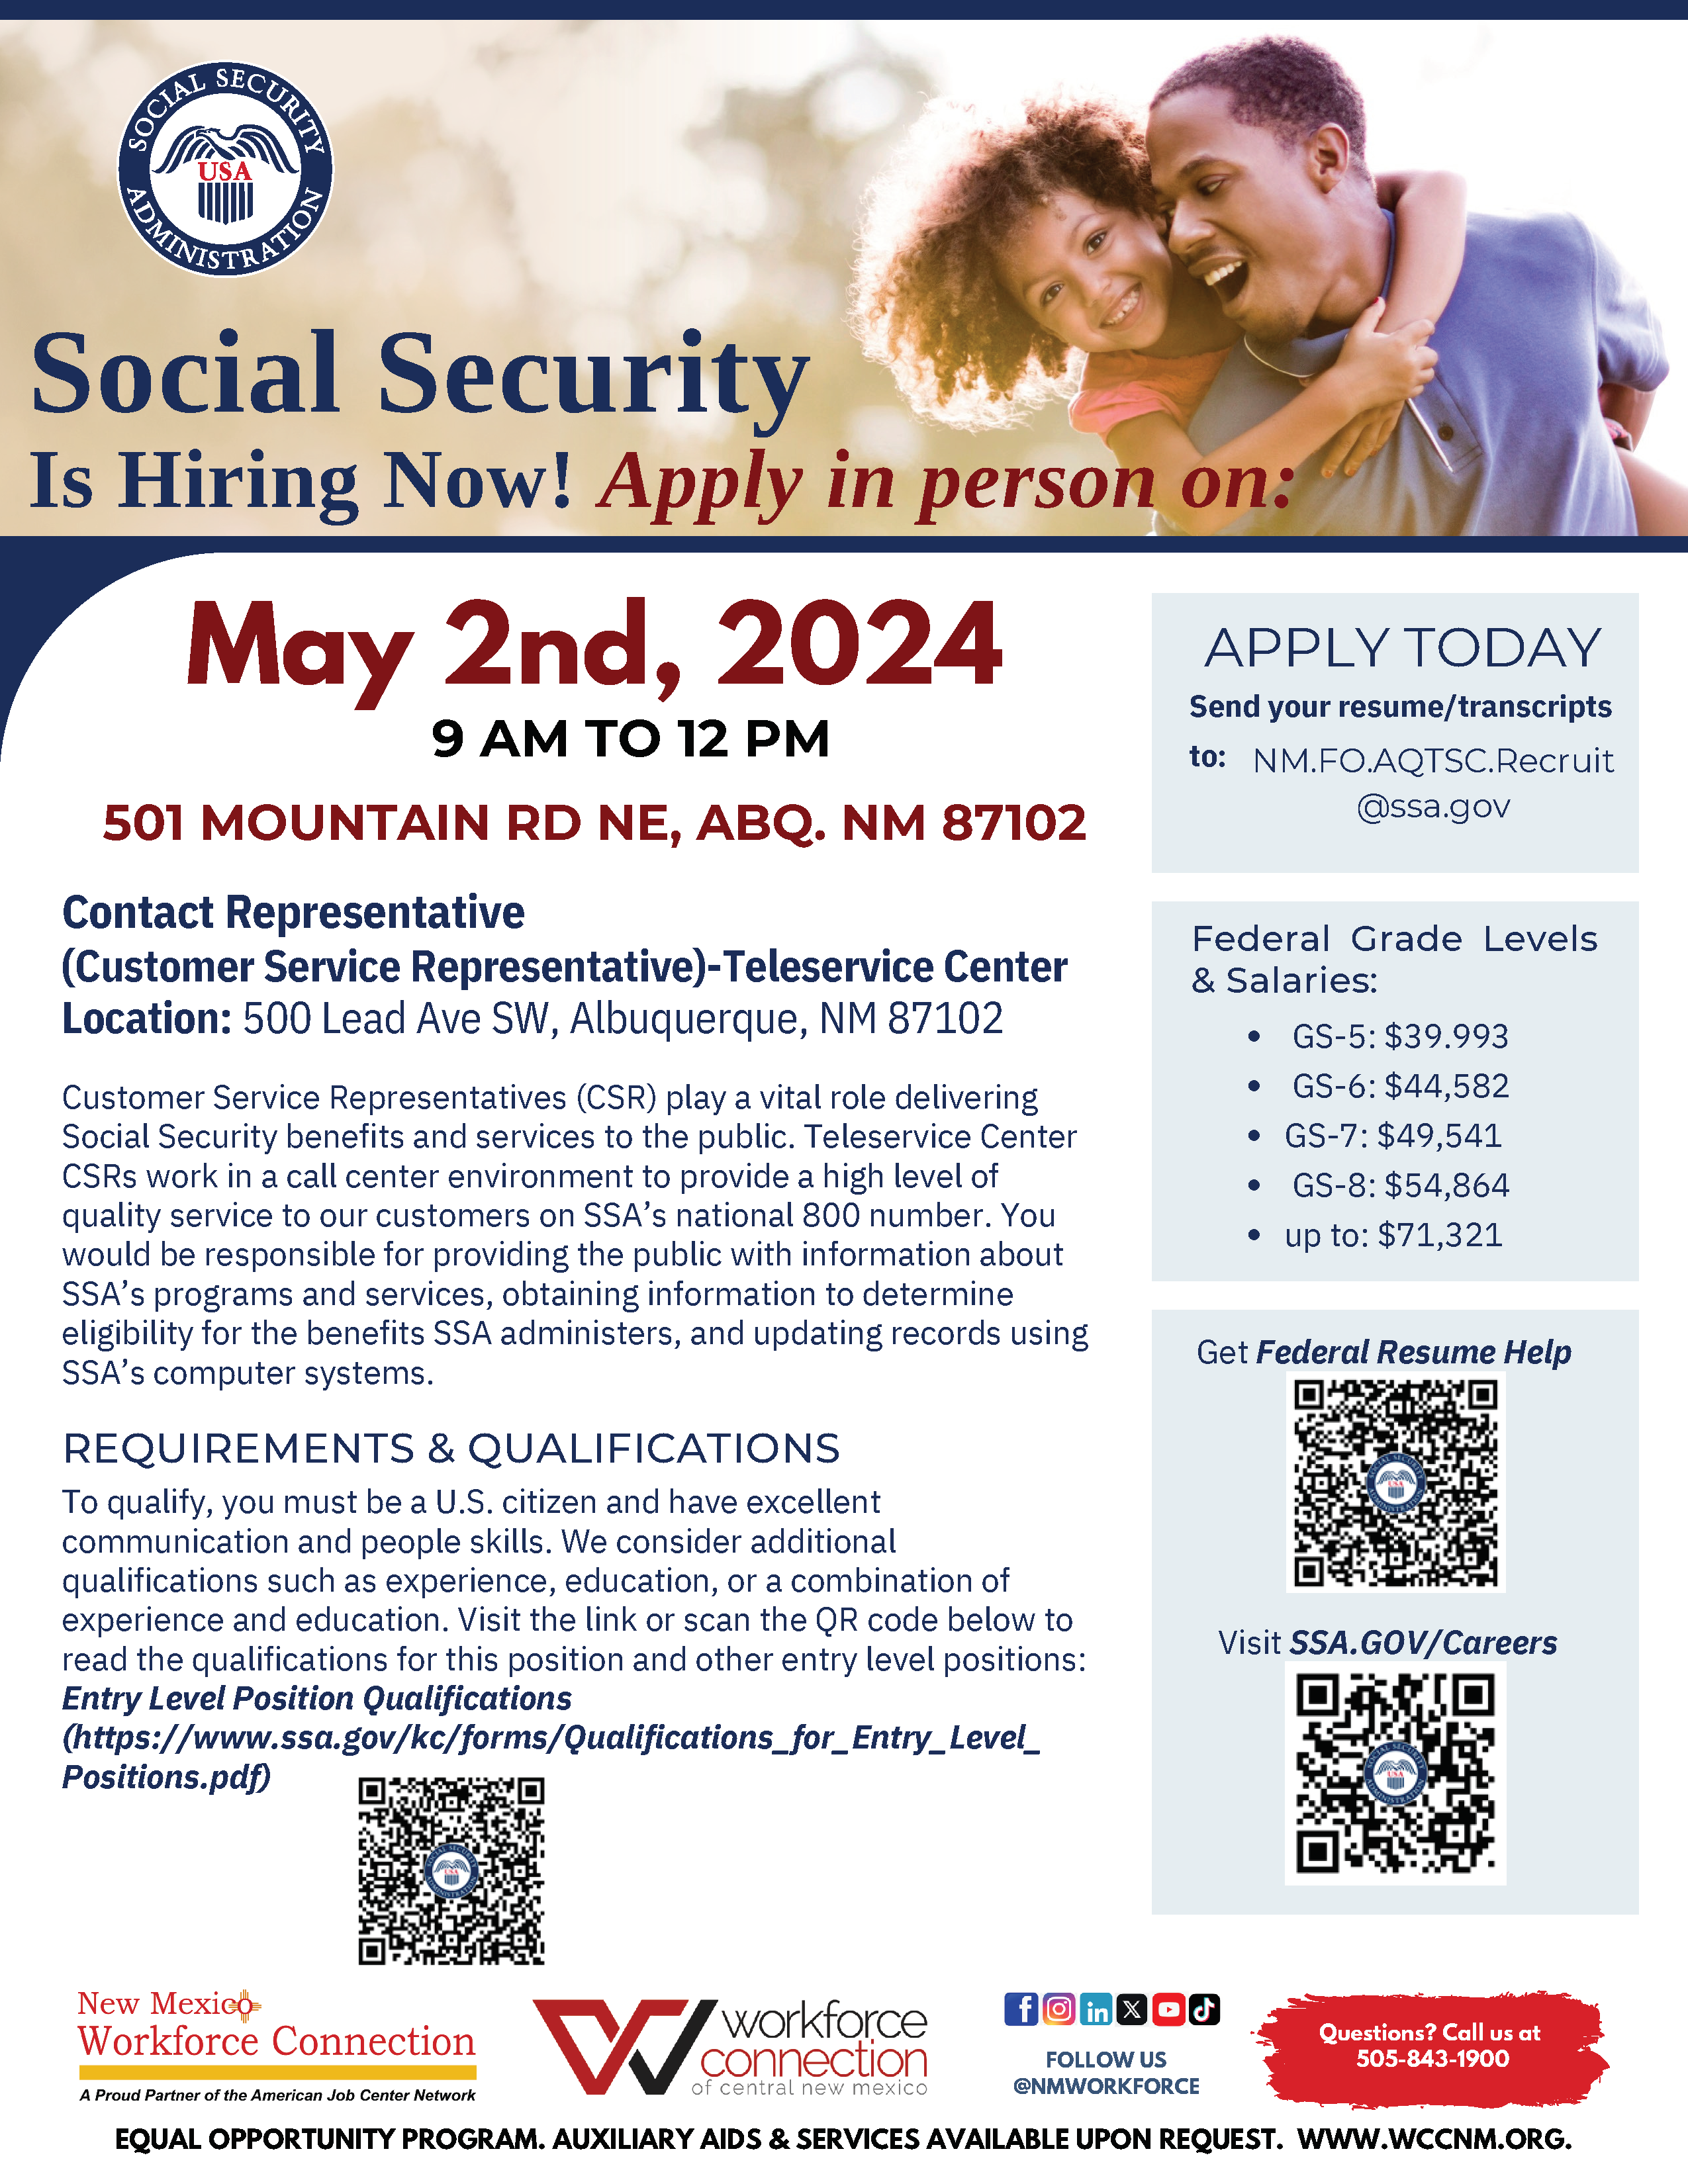 Social Security Administration is Hiring Now - Apply in Person on May 2, 2024 Flyer